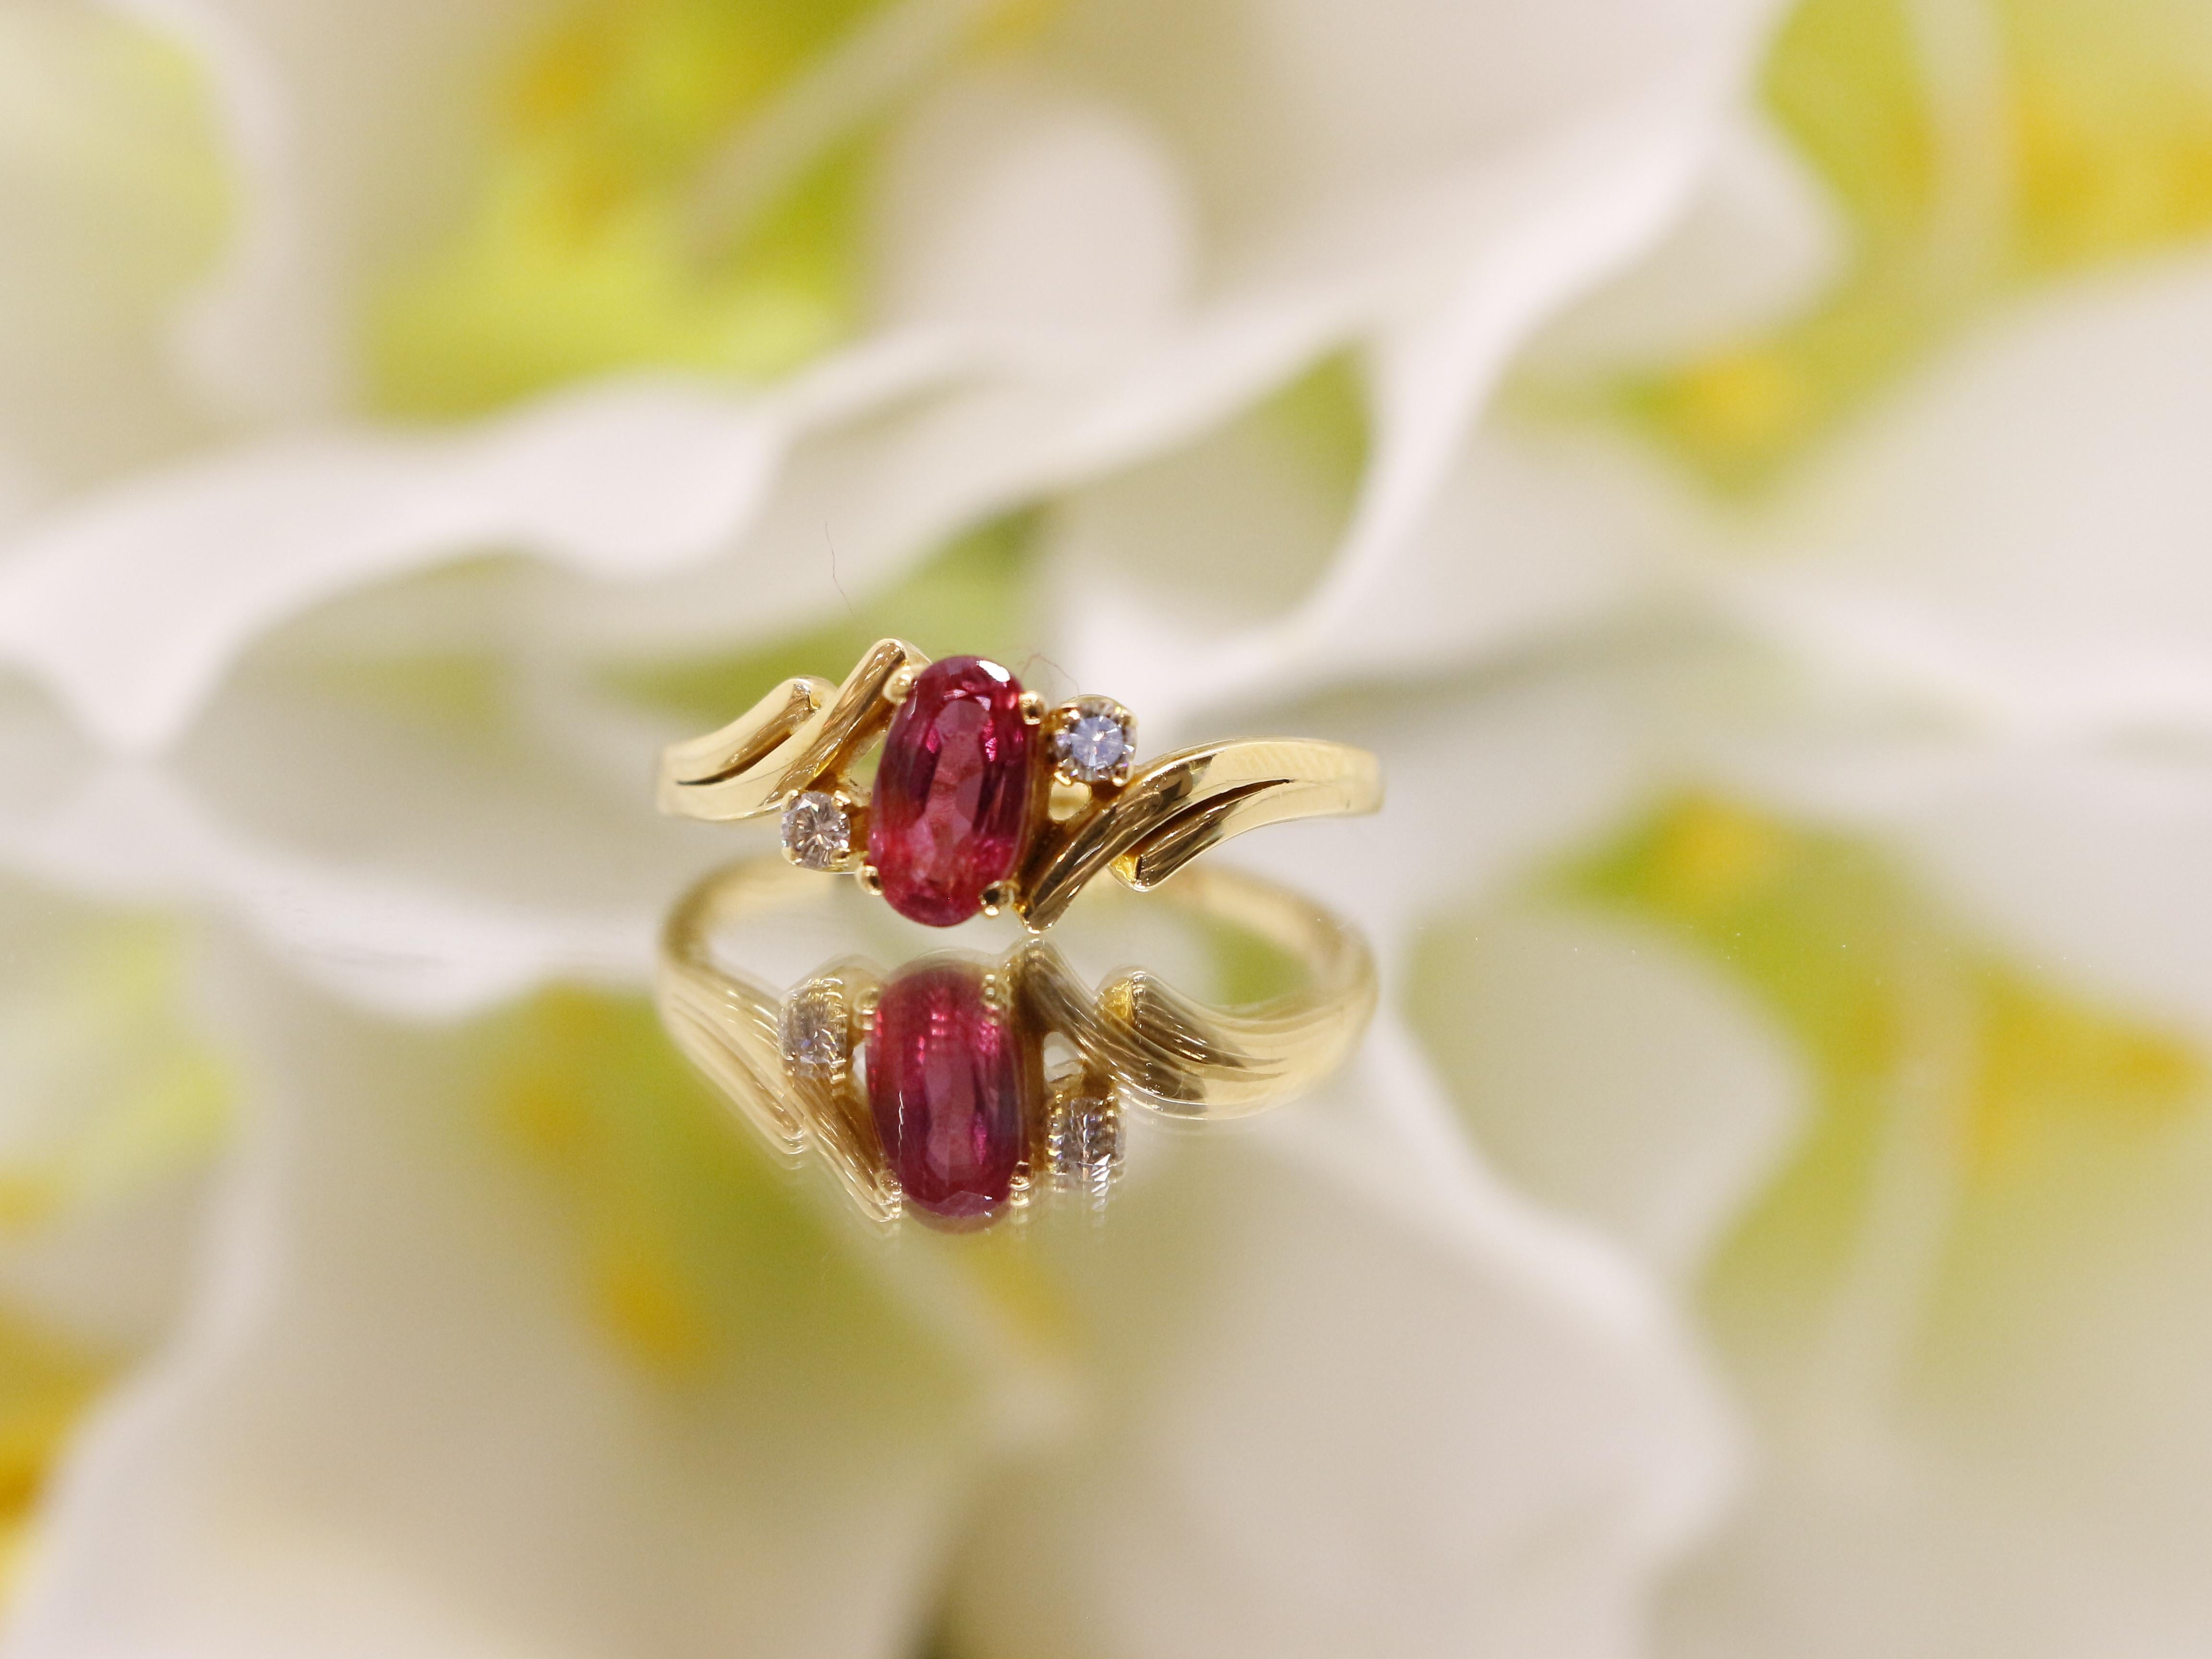 Engagement Ring, 18K Gold and Ruby engagement ring, engagement ring, Promise ring, filigree, antique, art nouveau, vintage,

◆Detail description◆

◆Solid 18kt Gold (shown in picture)

◆Ruby Weight: 1 CT

◆Diamond Carat: 0.3 CT

◆Diamond Shape: Round